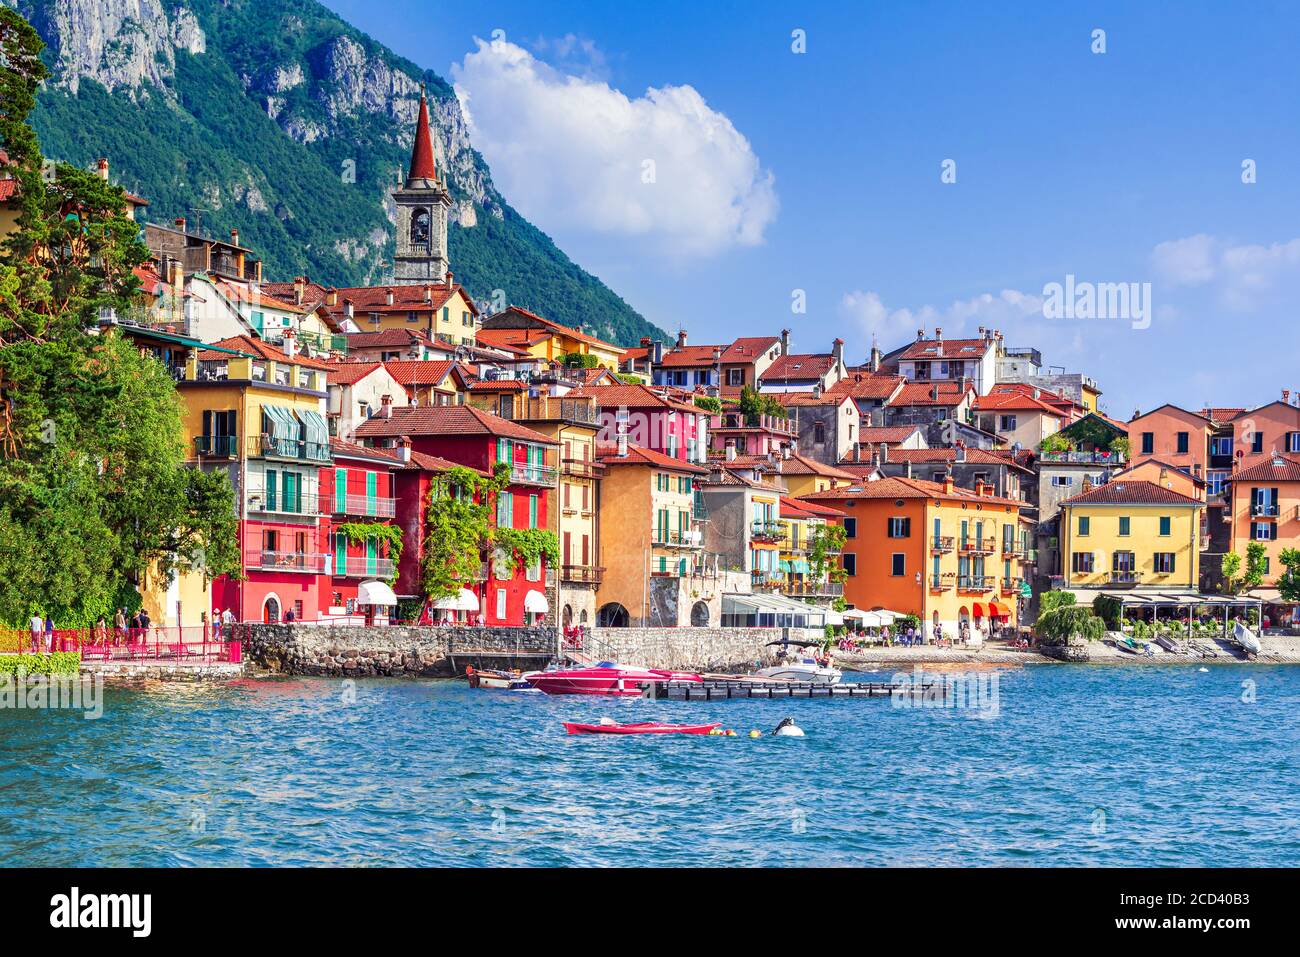 Varenna, Lake Como - Holidays in Italy view of the most beautiful lake in Italy, Lago di Como. Stock Photo